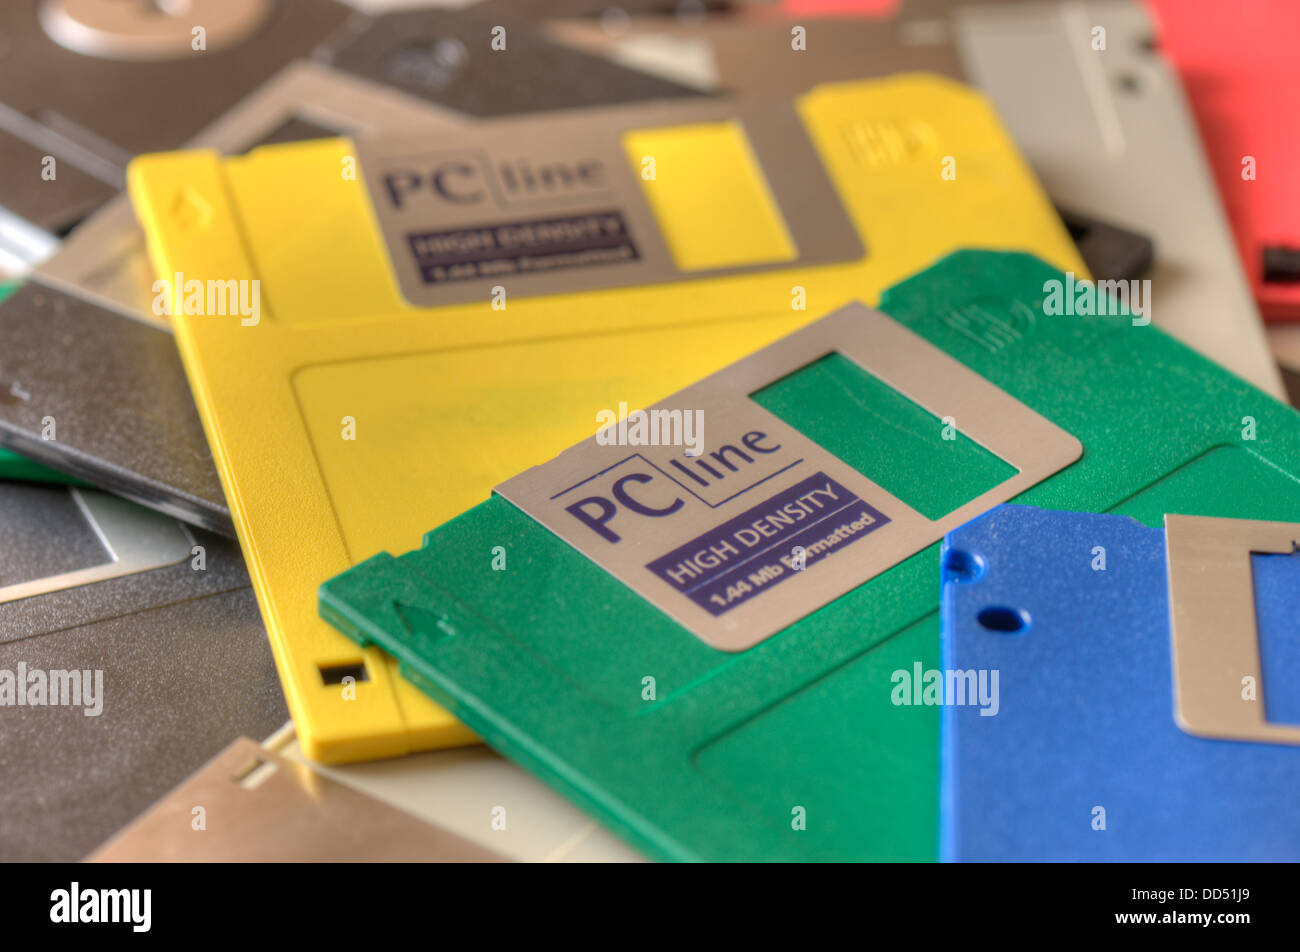 Close-up of 3.5' floppy disks Stock Photo